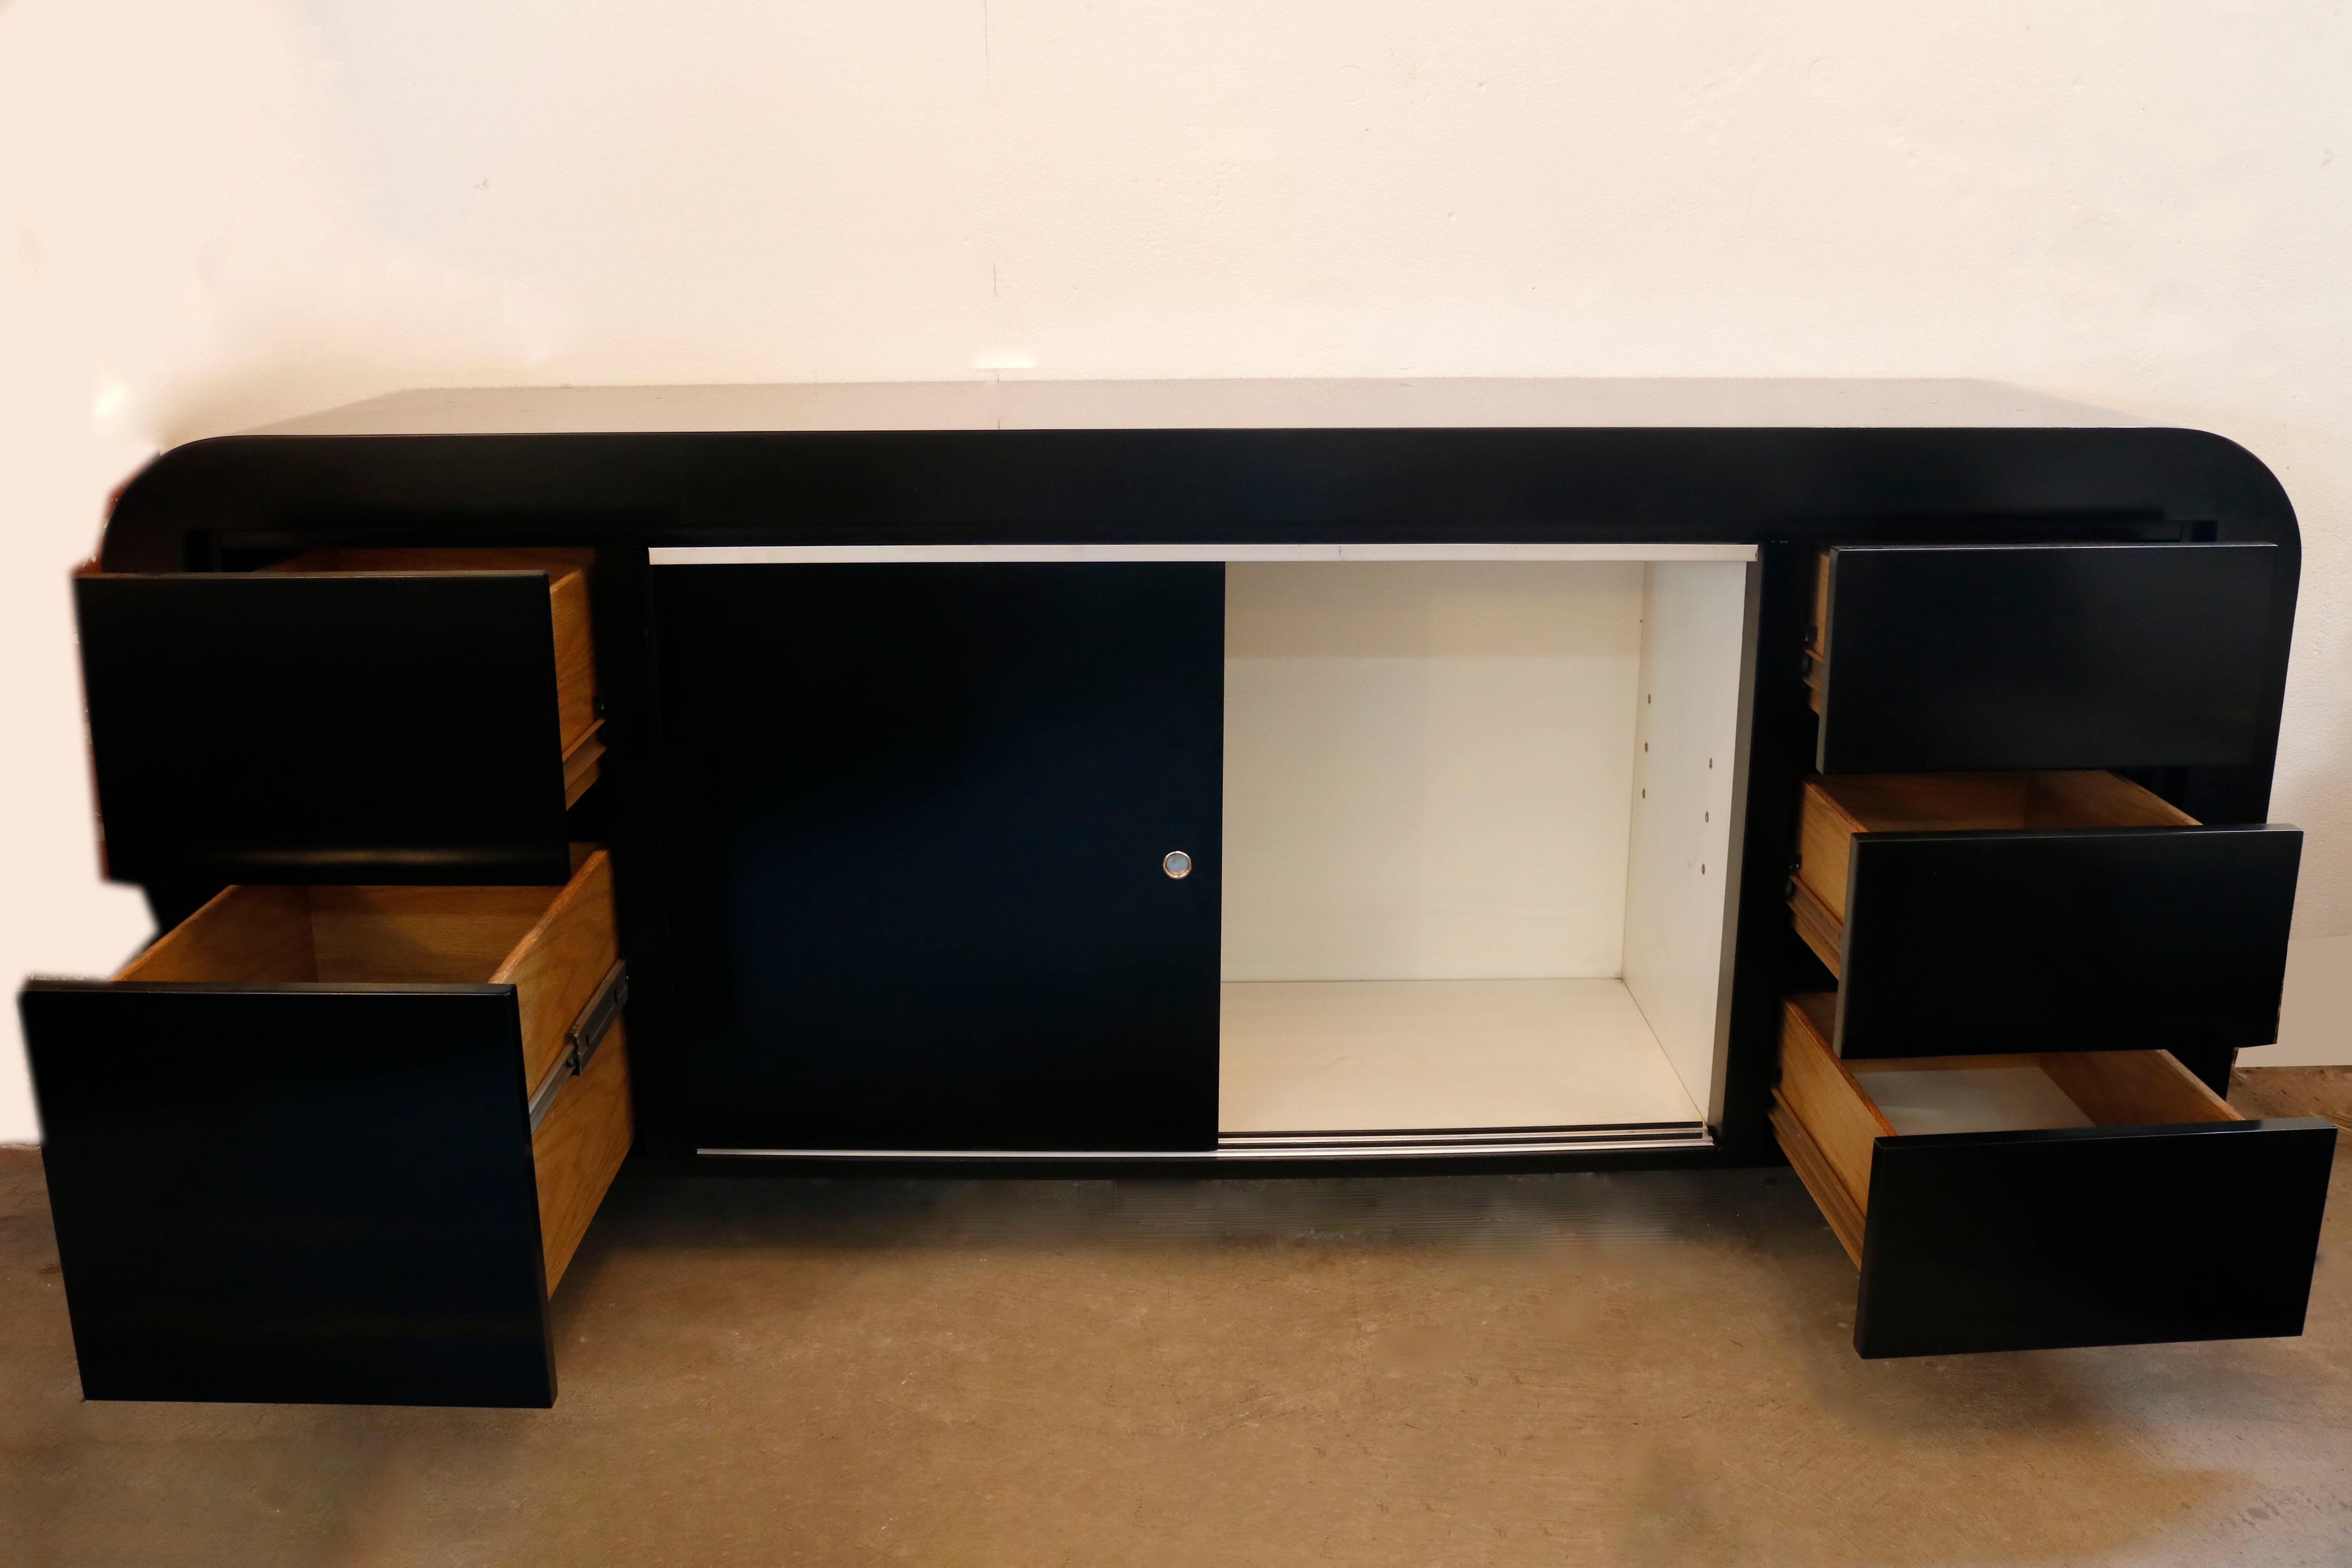 This lustrous, black lacquered credenza, complete with smooth round edges, has ample storage space including 3 drawers on the right side and 2 file drawers on the left. The middle cabinet features sliding doors opening on a shelf. The piece has